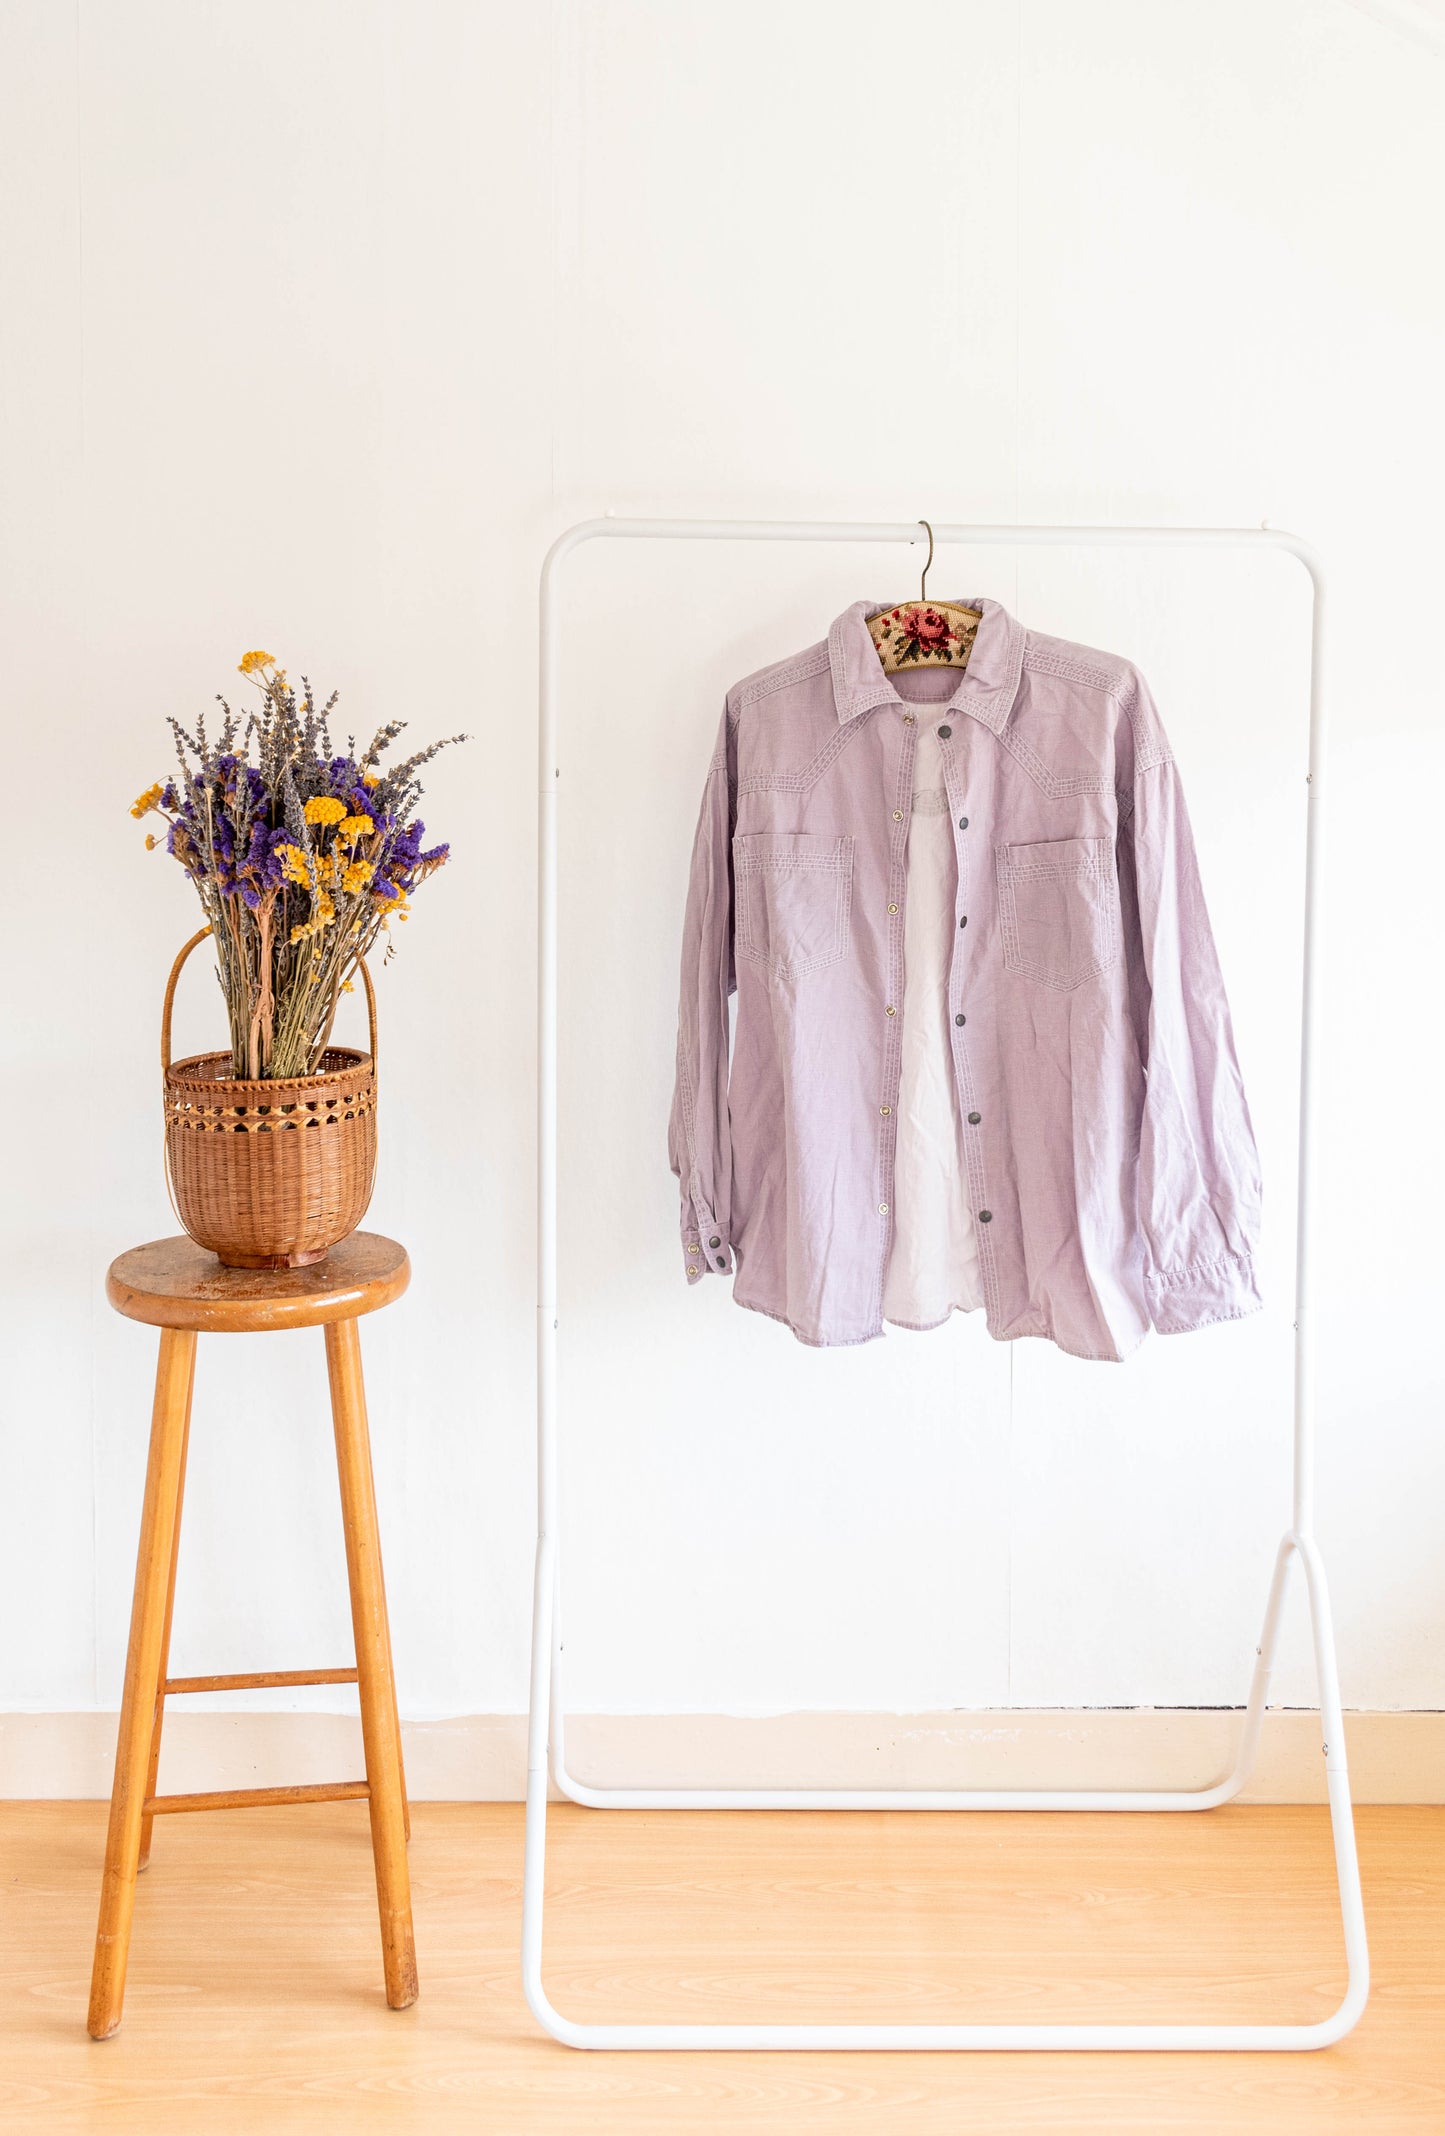 NEW IN! Lilac shirt